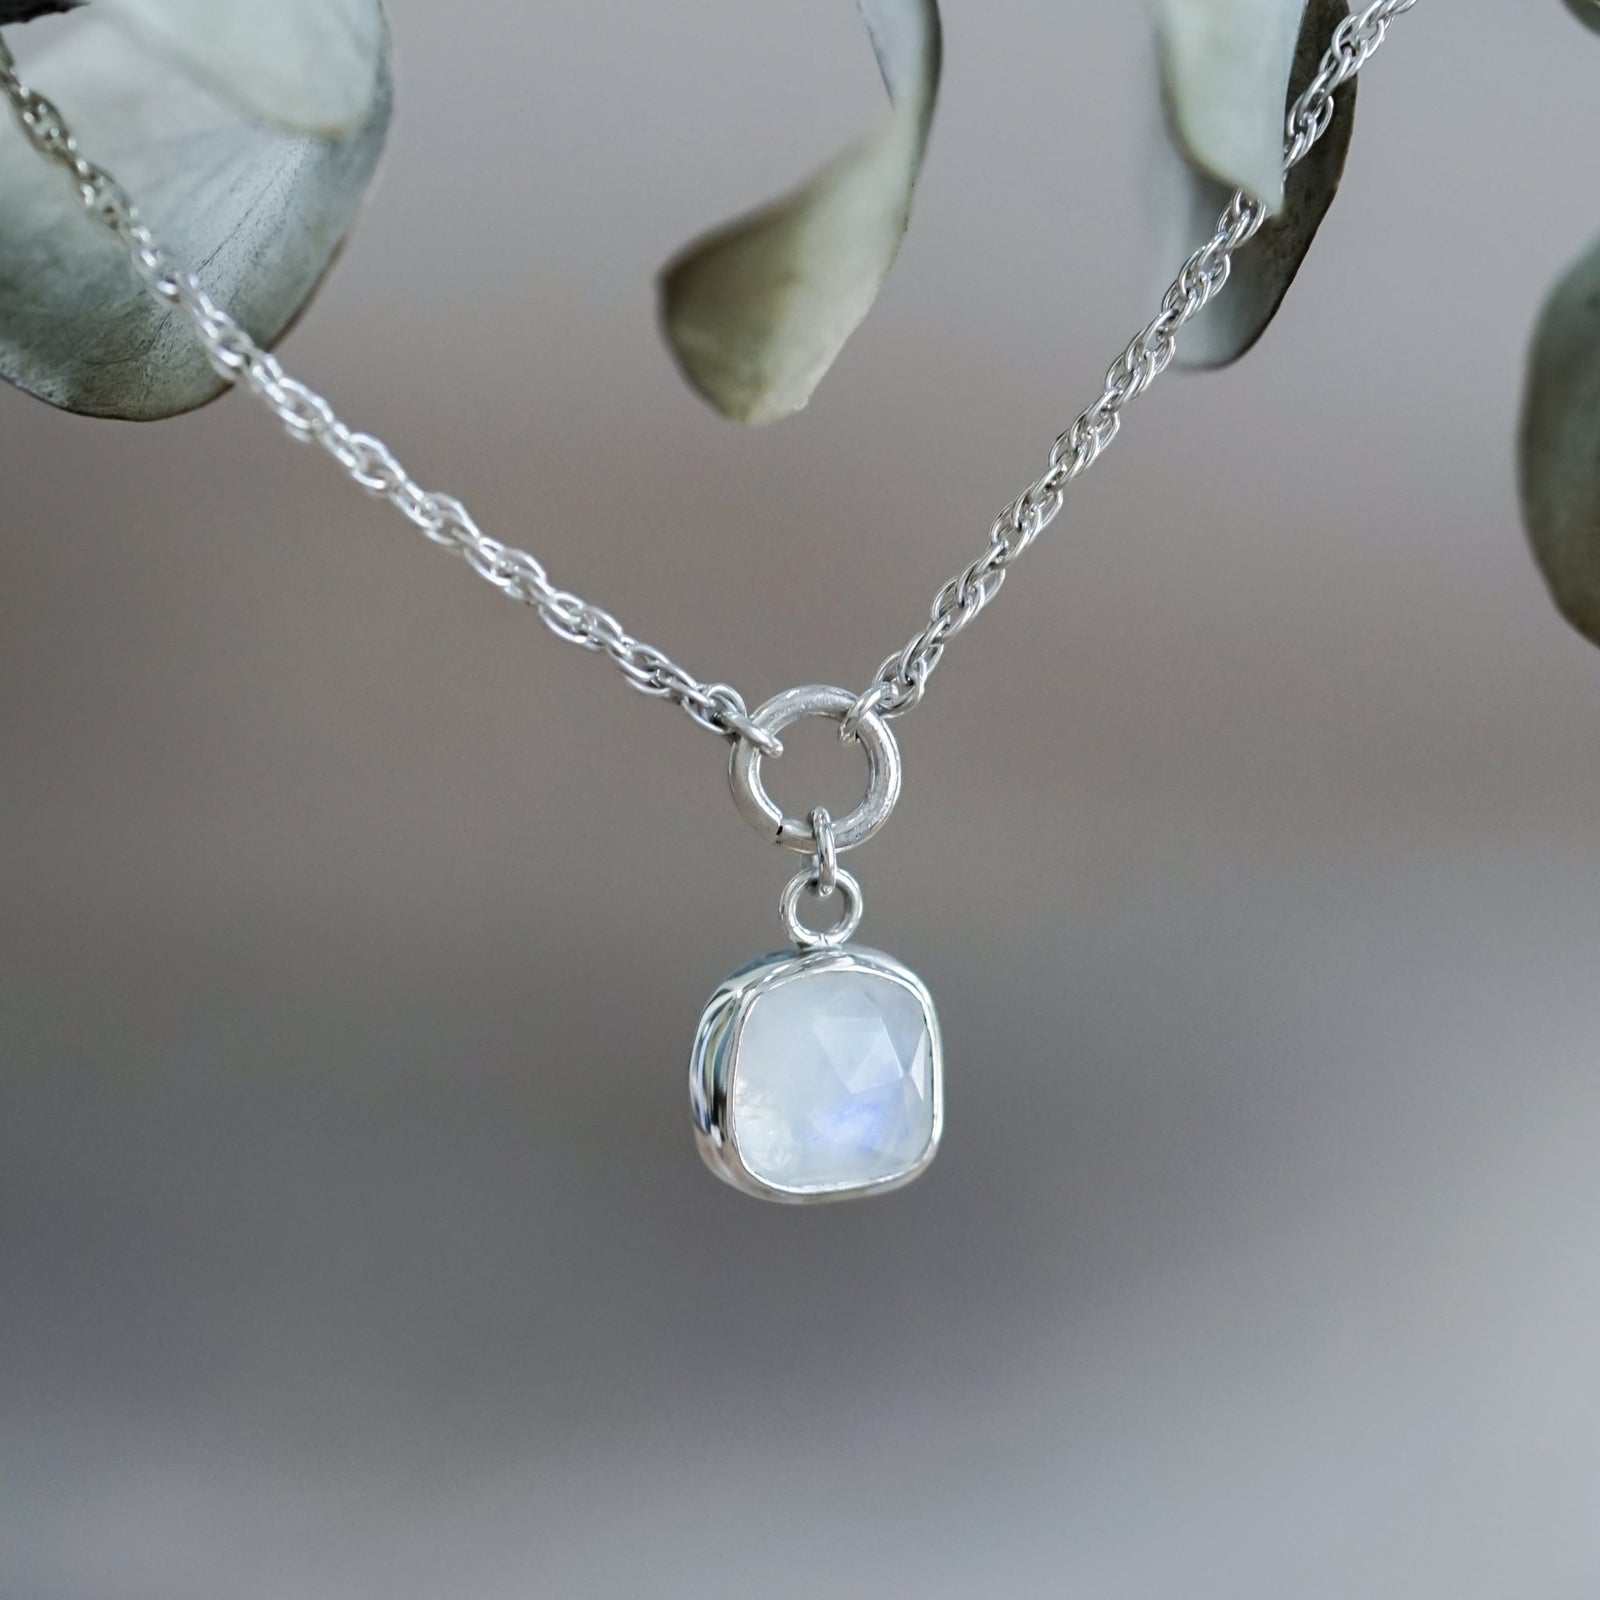 6 Moonstone Facts That Will Blow Your Mind